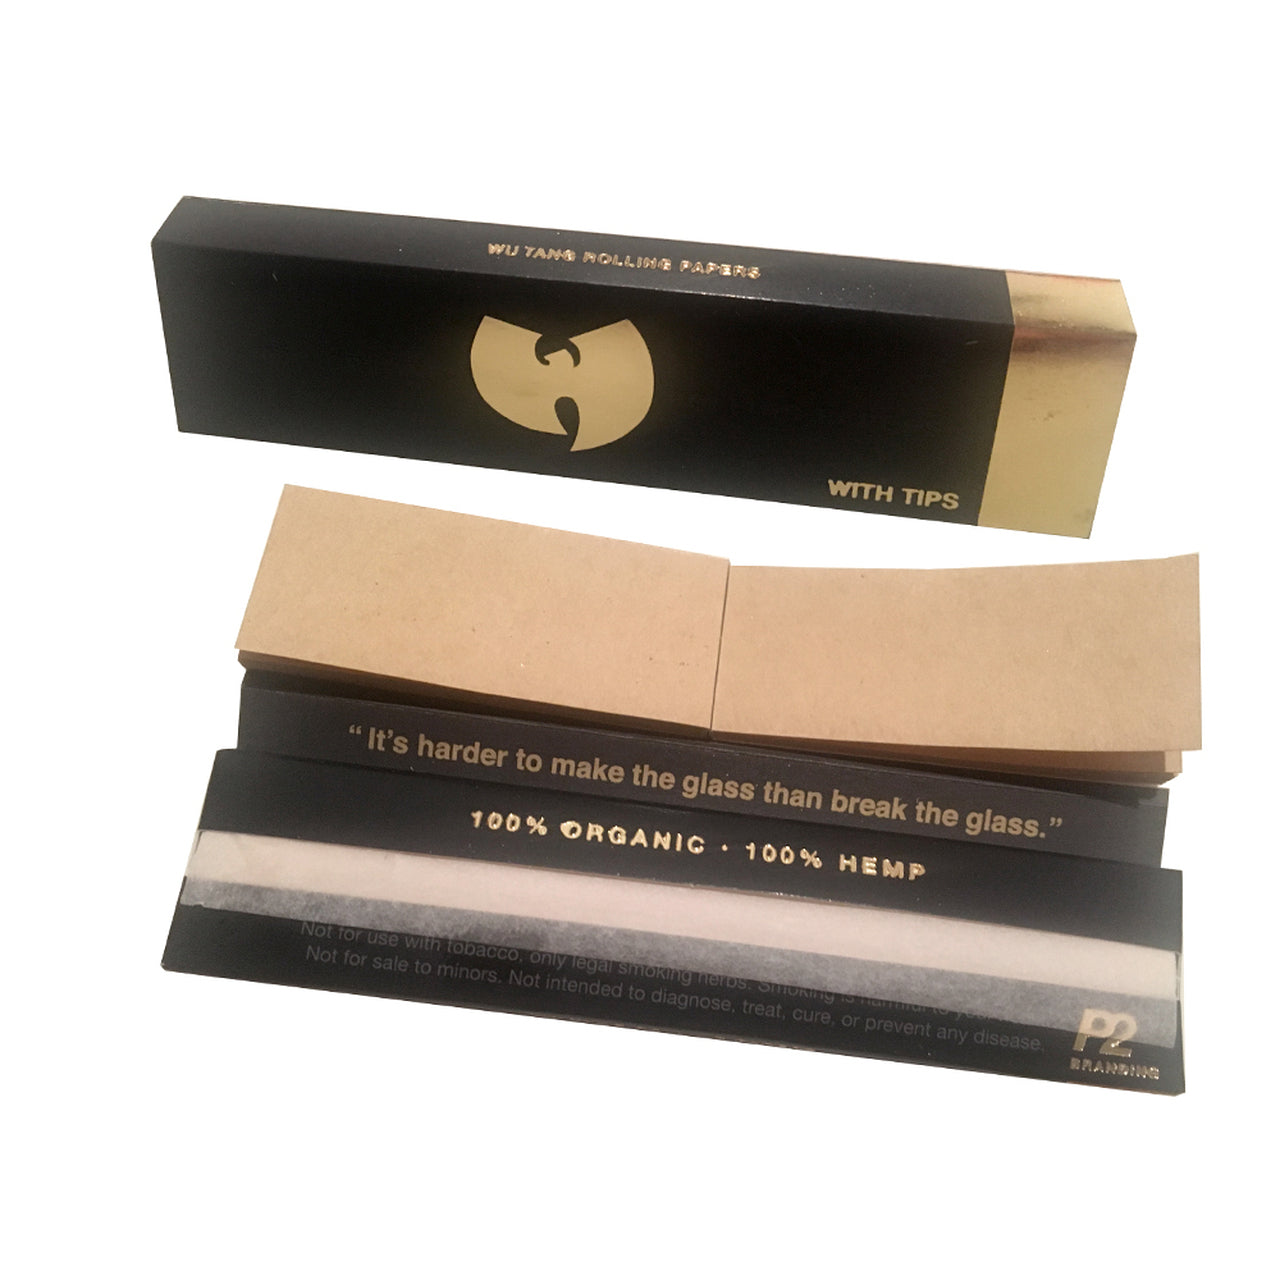 wu tang rolling papers king size slim tips